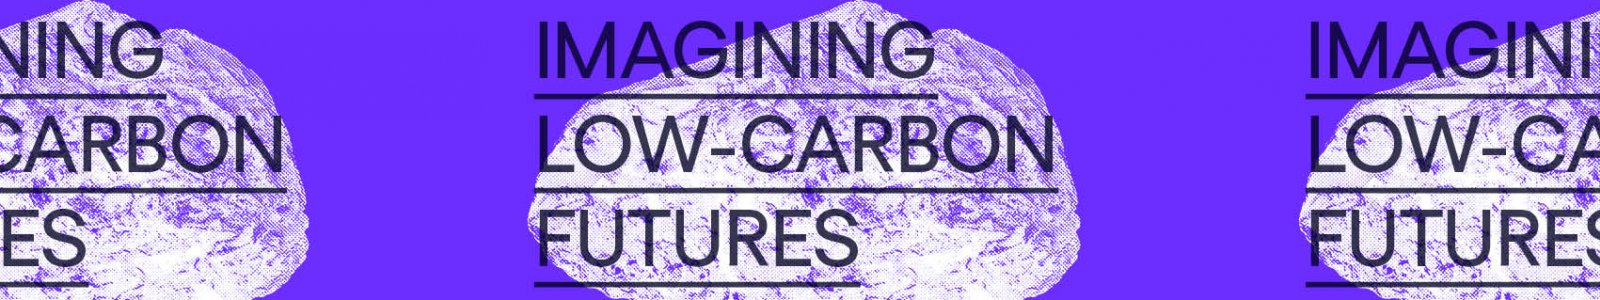 purple banner with white stone-like shape and text 'IMAGINING LOW-CARBON FUTURES'